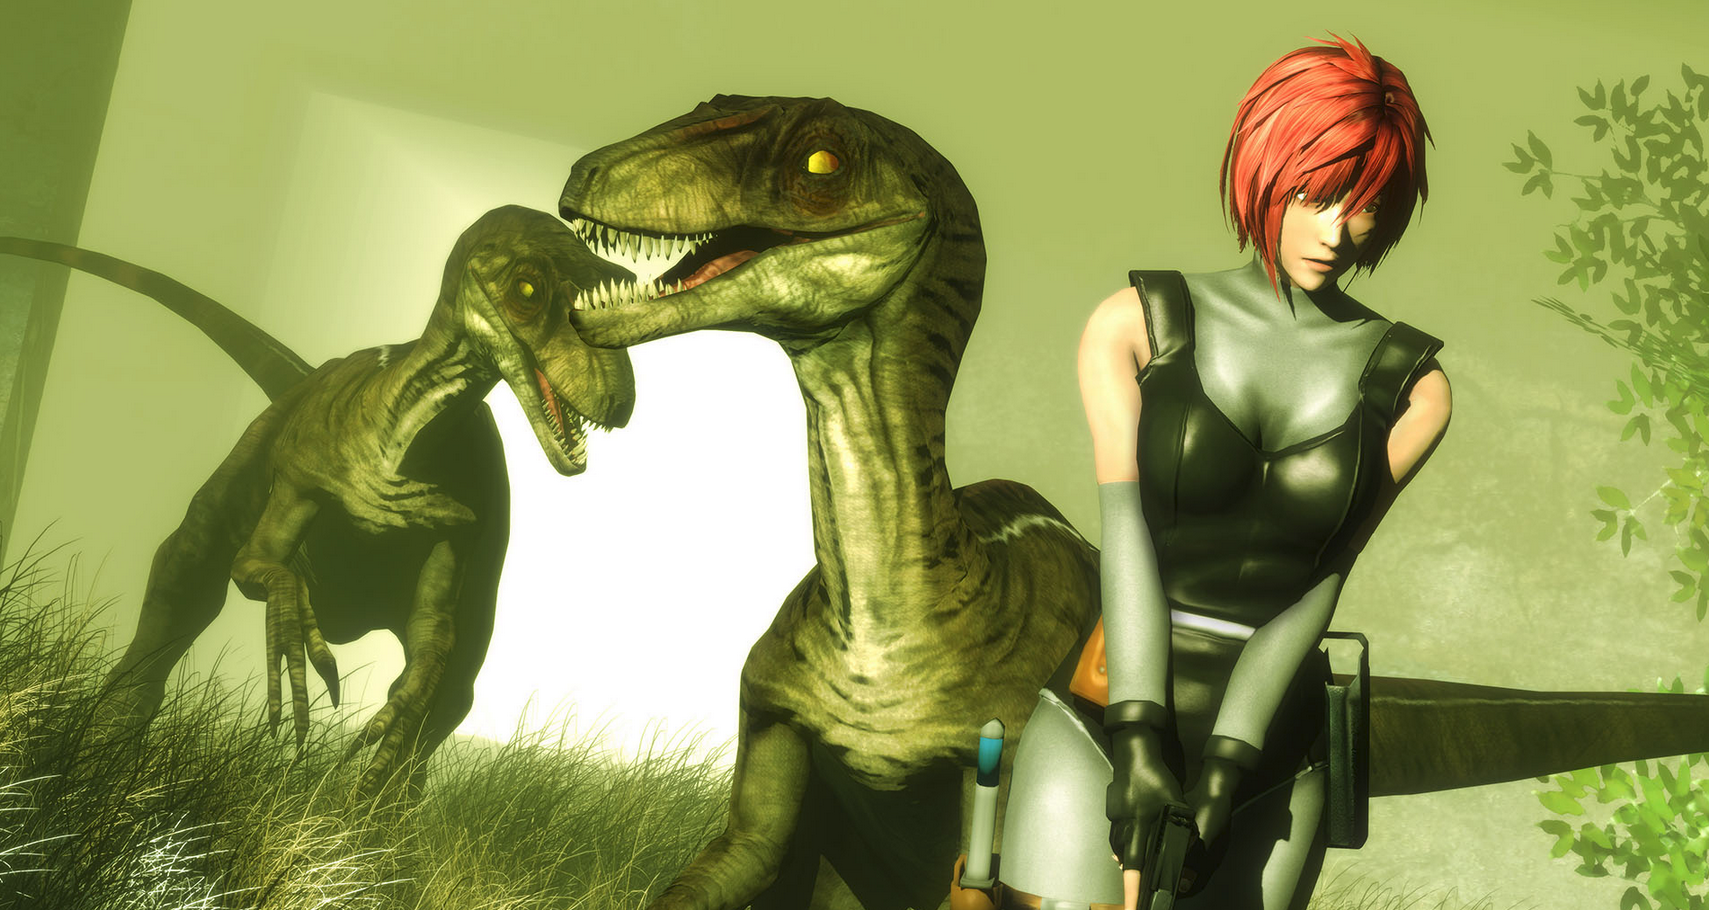 Exoprimal could get Dino Crisis content 'if there's enough demand